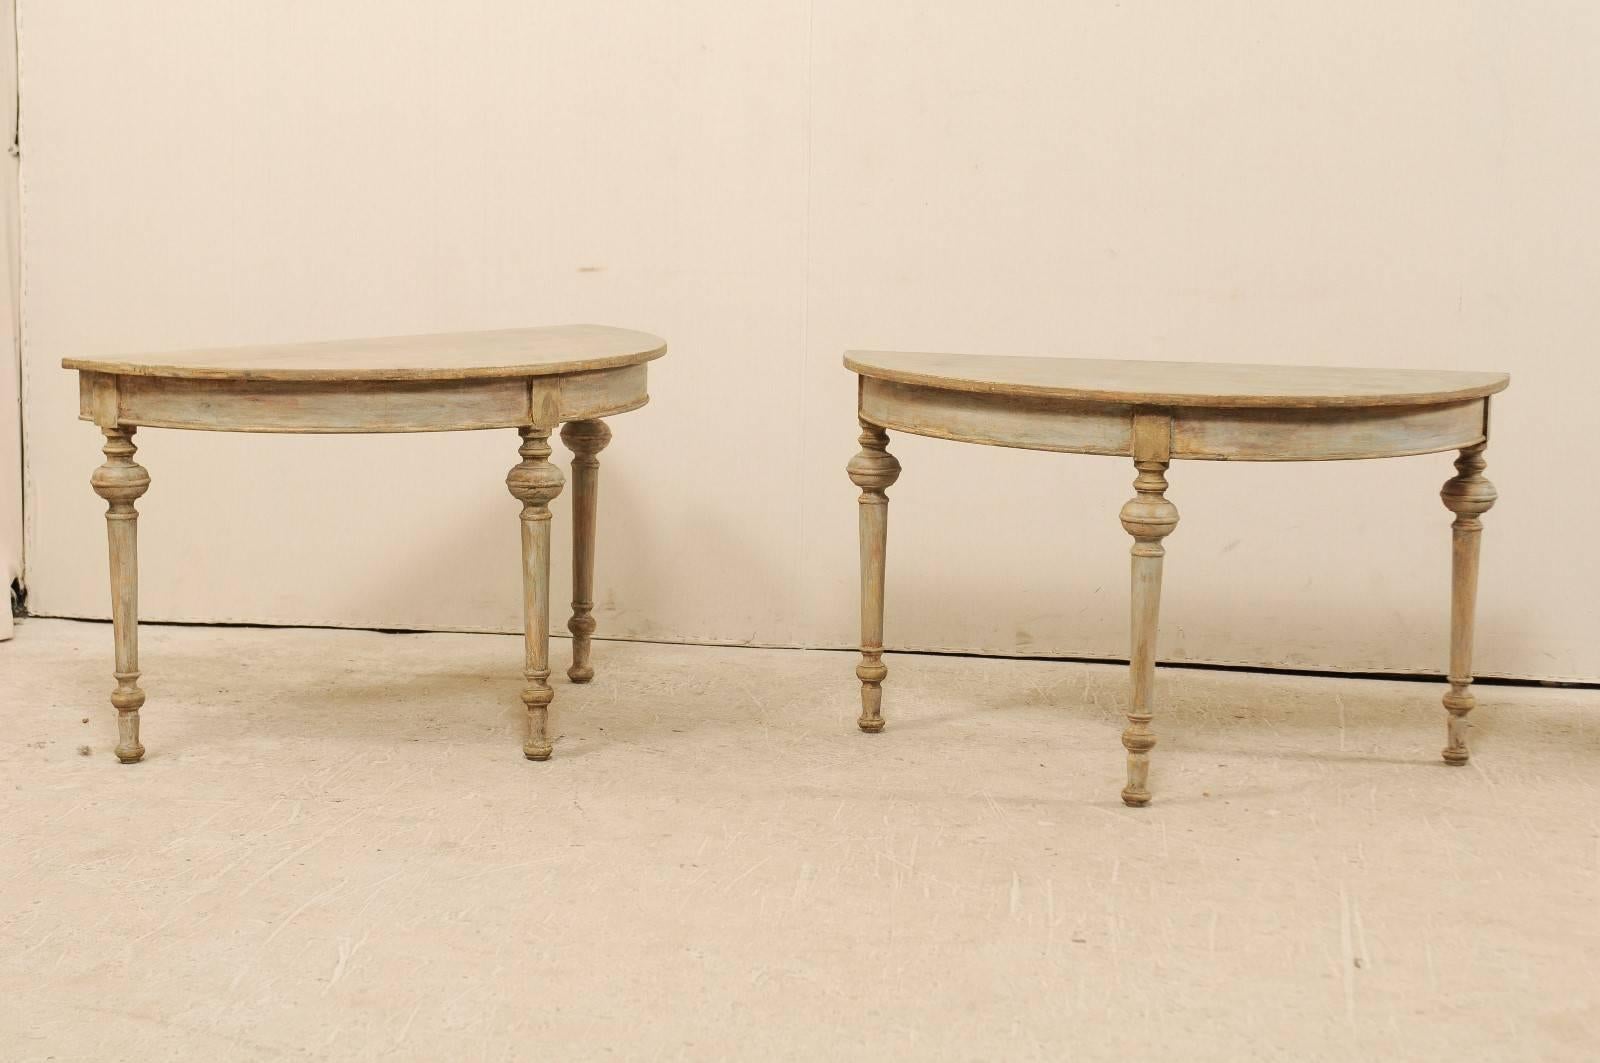 A pair of 19th century Swedish demilune tables. This pair of painted wood demilune tables features half moon tops over round aprons, raised on turned and slightly tapered legs. The overall color of these tables is a blue-grey with traces of green